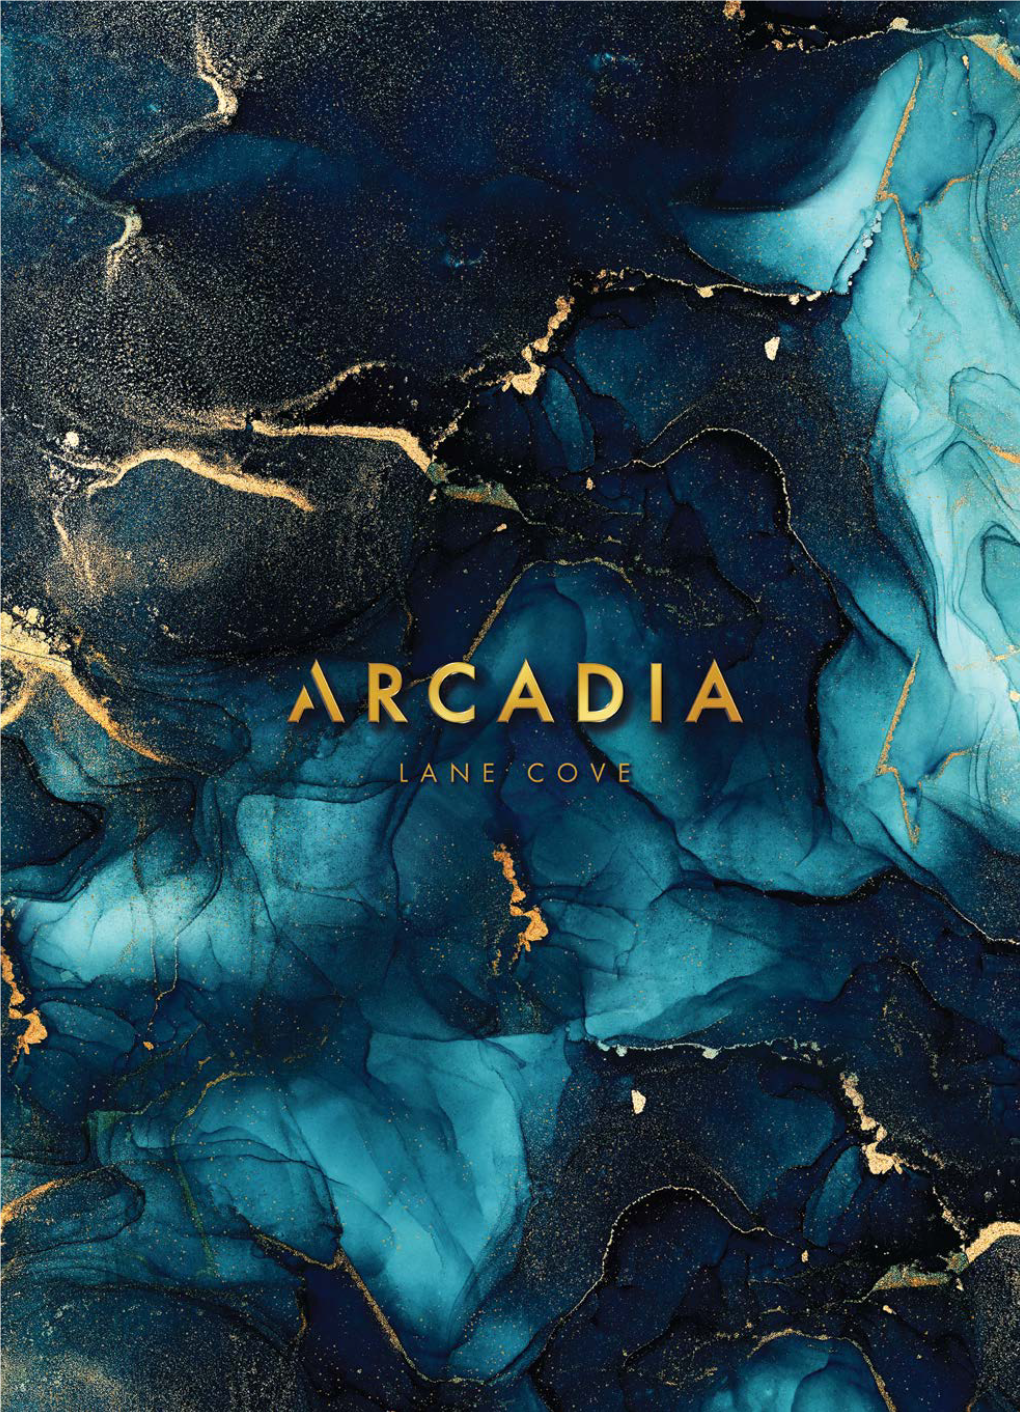 Lush Luxurious Living Living As Lane Cove’S Most Coveted New Address, Arcadia Is Where the Beauty of Nature Meets the Rare Indulgence of Fine Design